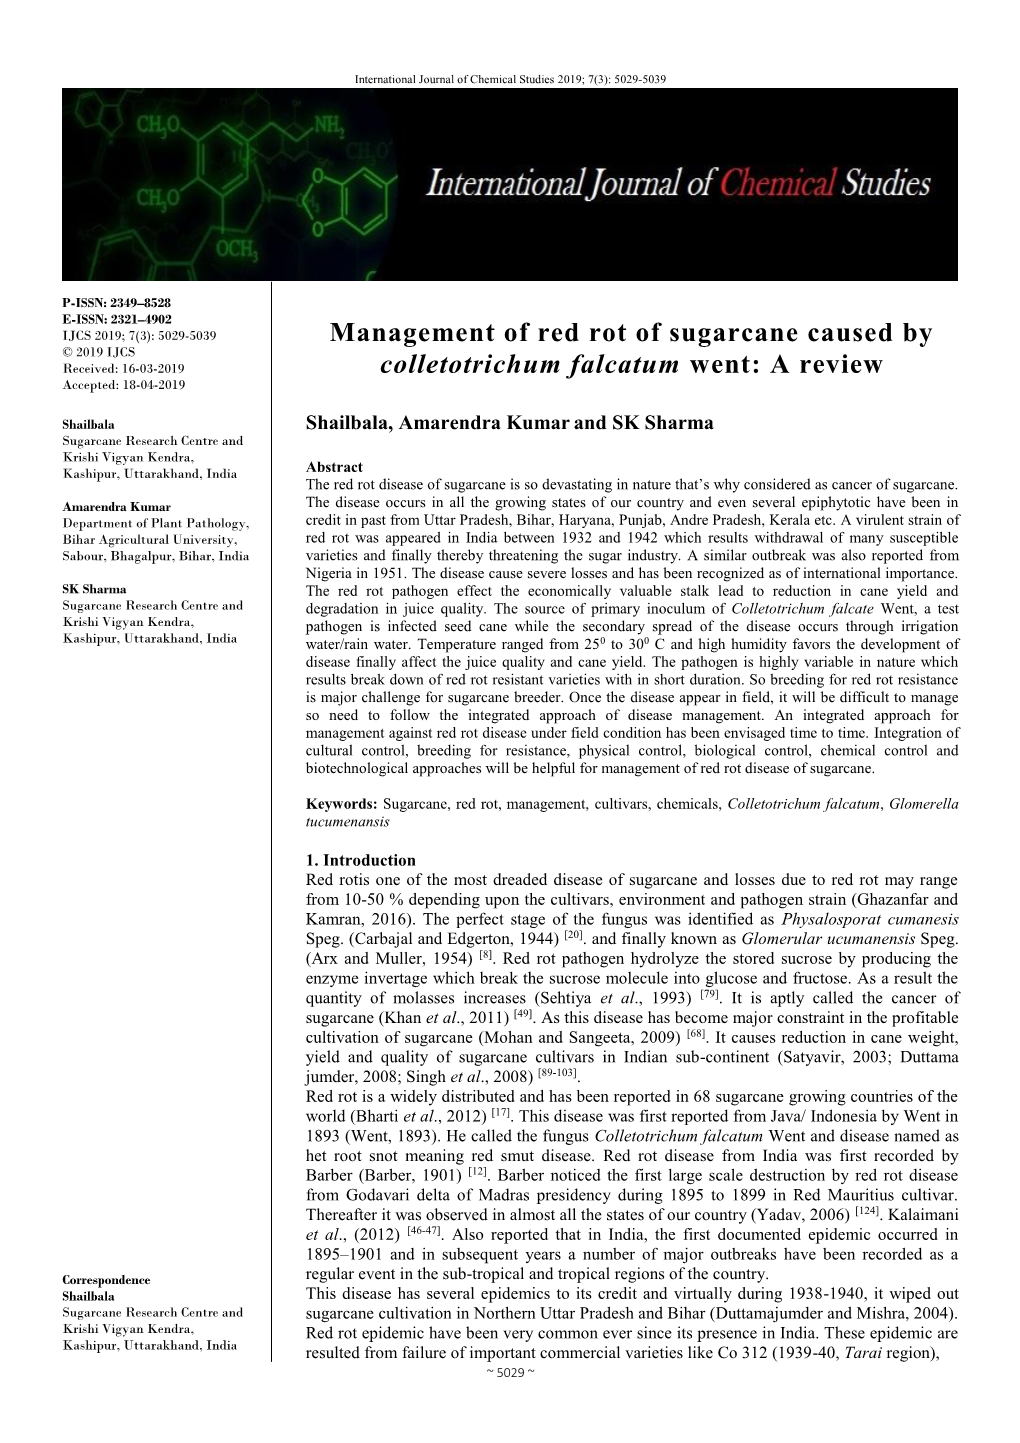 Management of Red Rot of Sugarcane Caused by Colletotrichum Falcatum